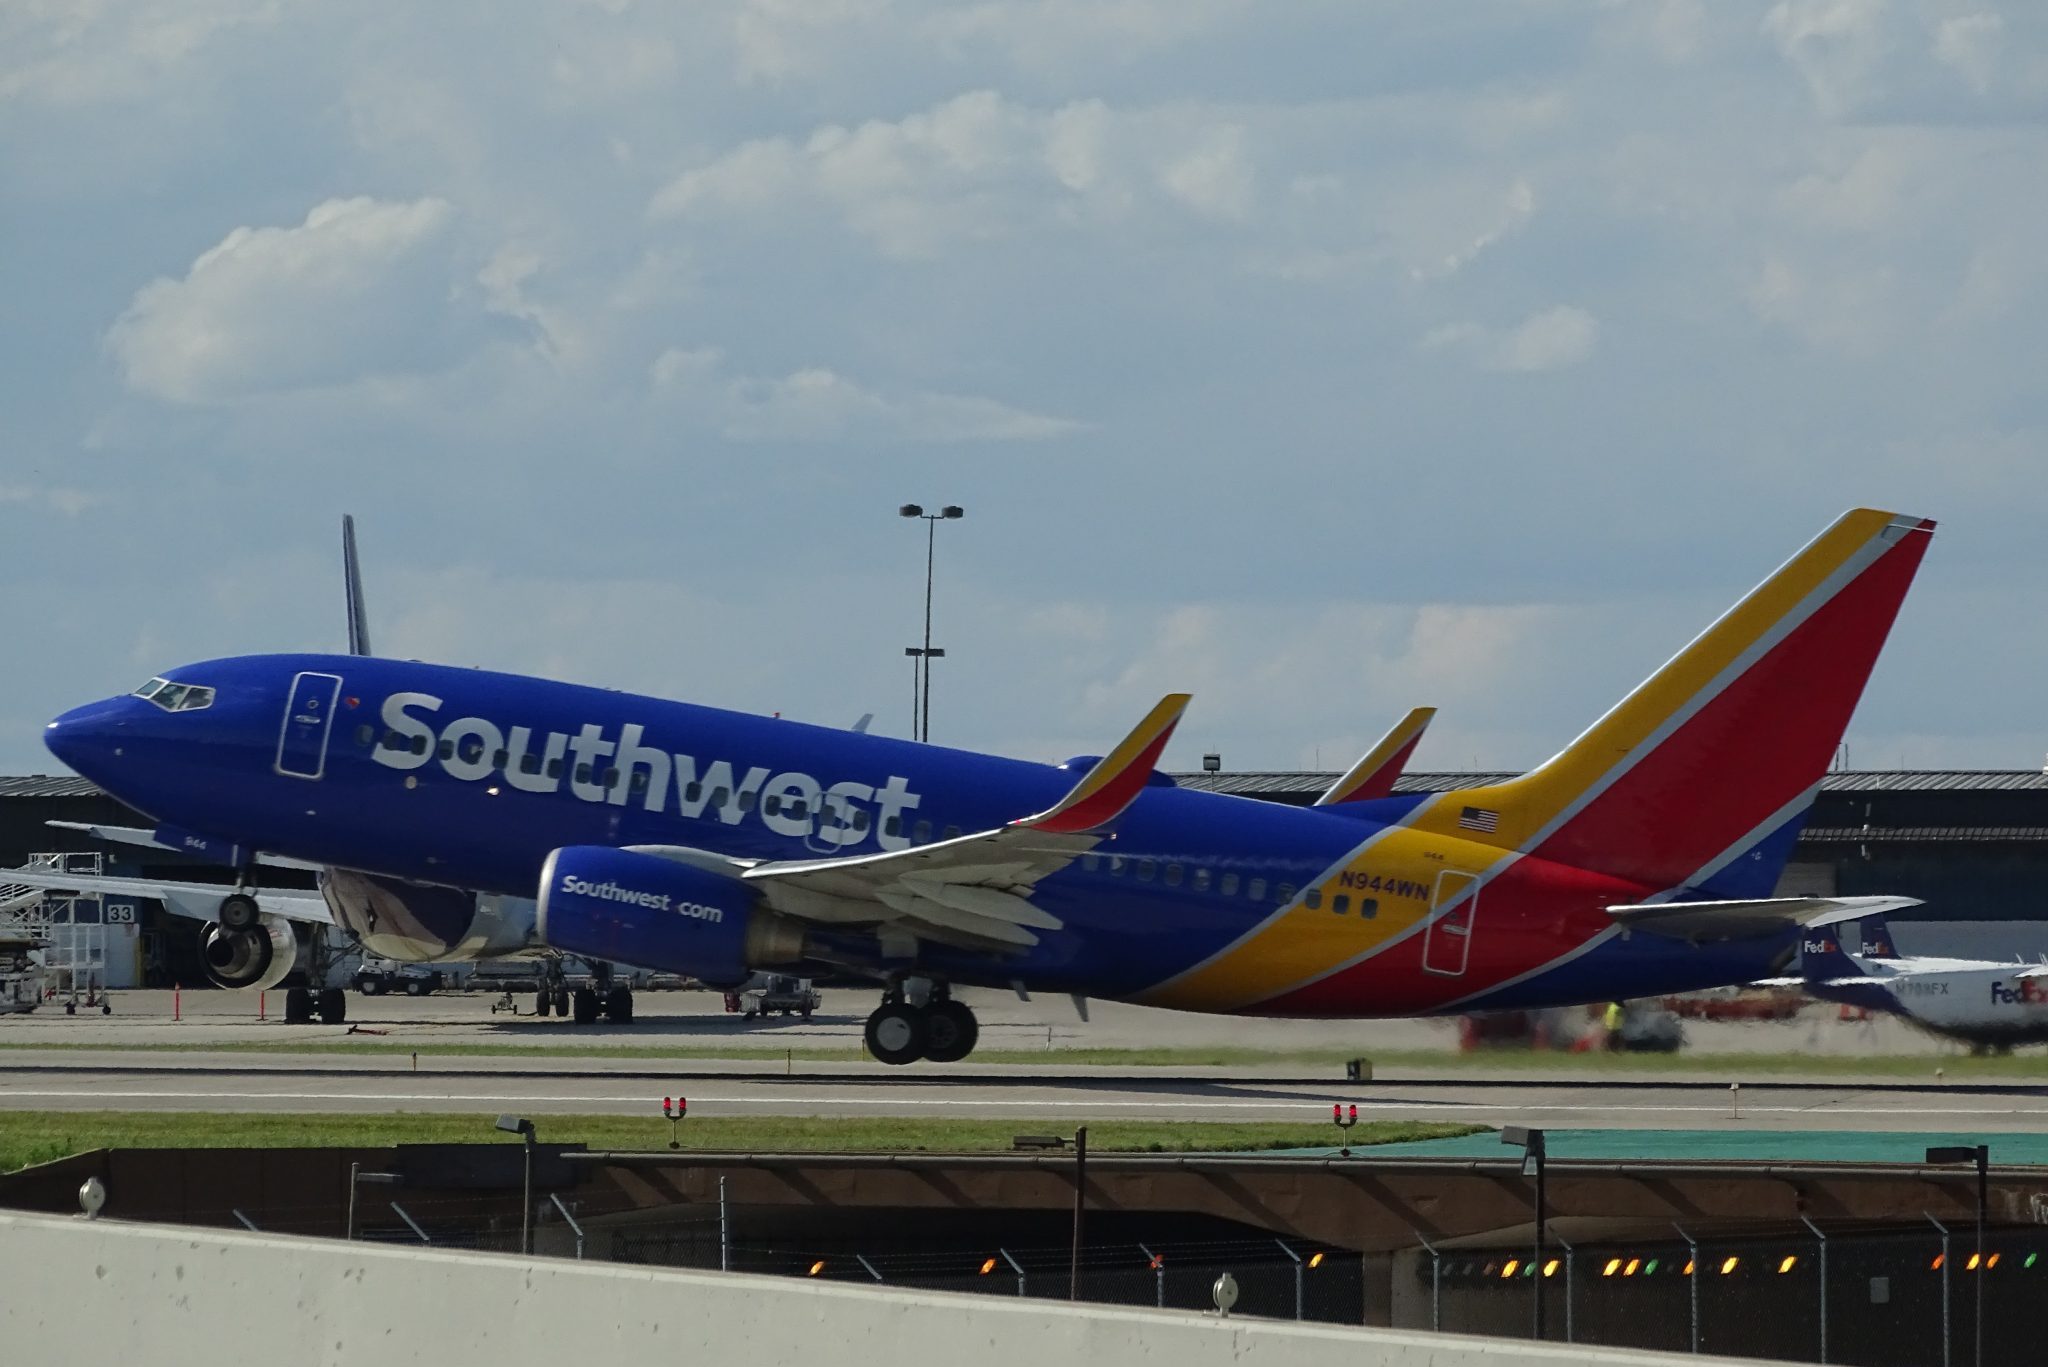 Most of Southwest's staffing reductions could be achieved through voluntary measures, its pilots association believes.